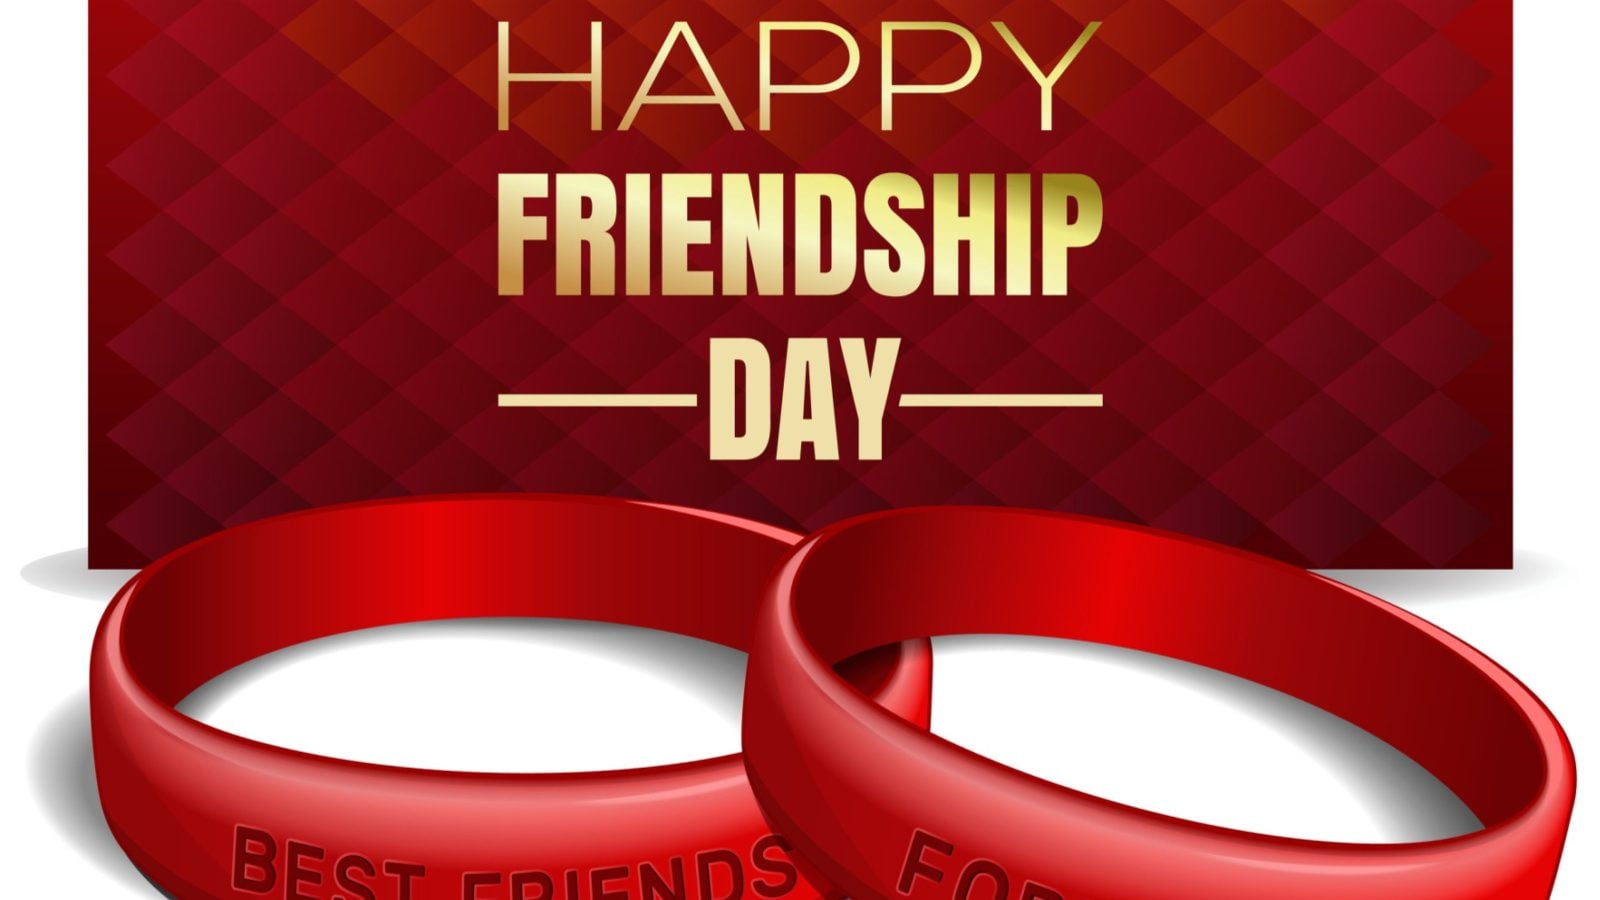 Happy Friendship Day 2022: Wishes, Image, Greetings, Quotes, Messages and WhatsApp Greetings to Share With Your Buddy